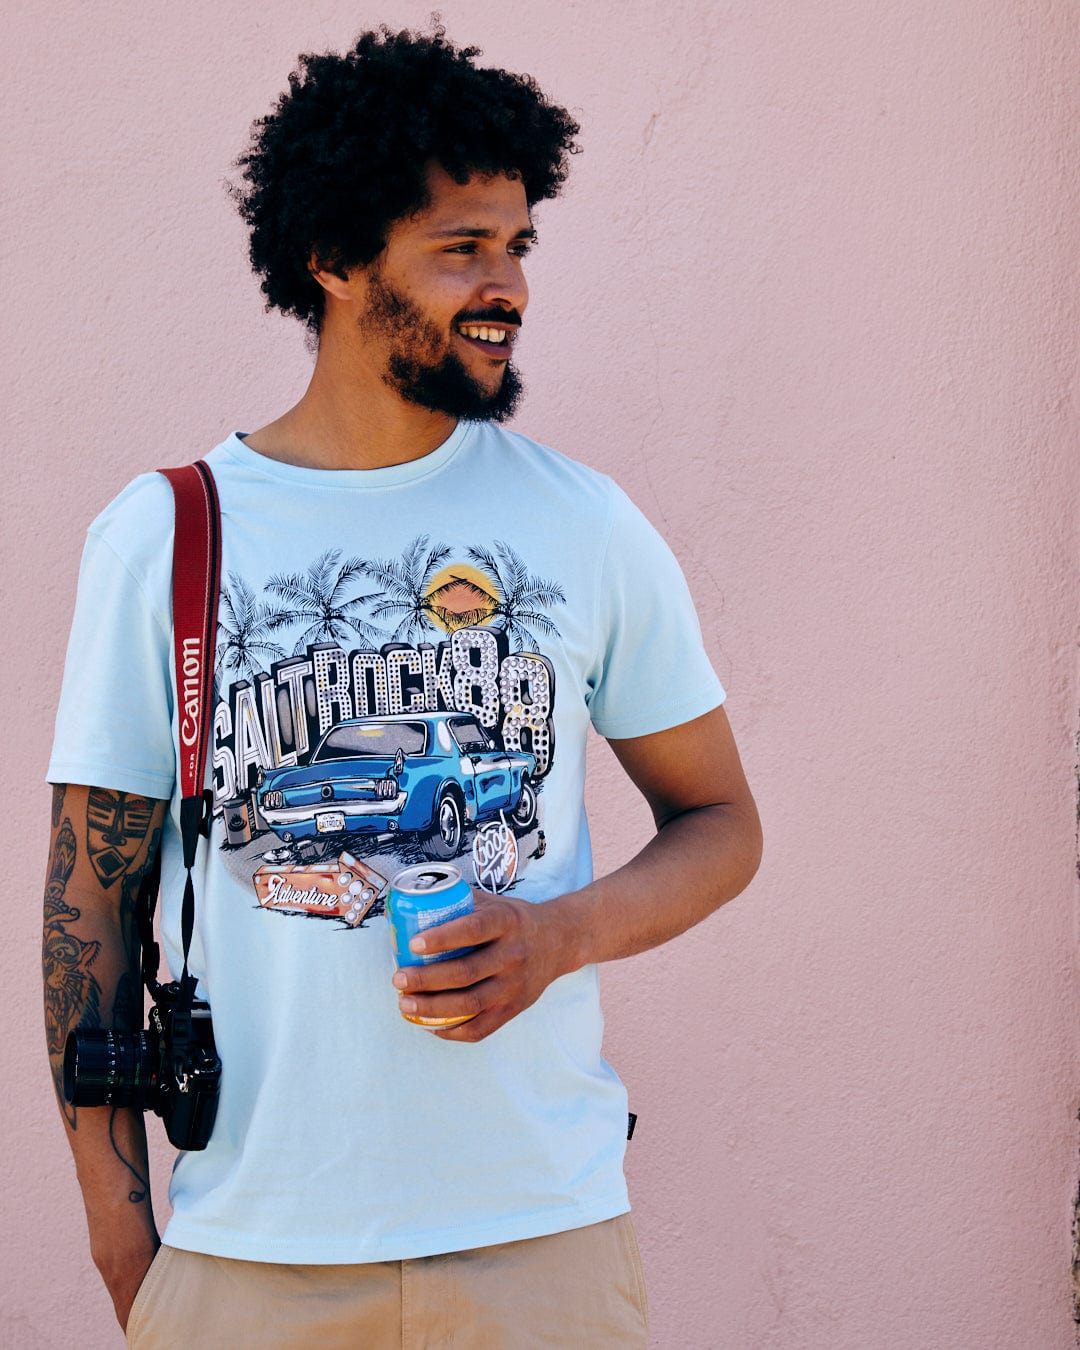 A man with curly hair, holding a beverage can, stands against a pink wall wearing a Saltrock Neon Boneyard - Mens Short Sleeve T-Shirt in Light Blue and carrying a red shoulder bag.